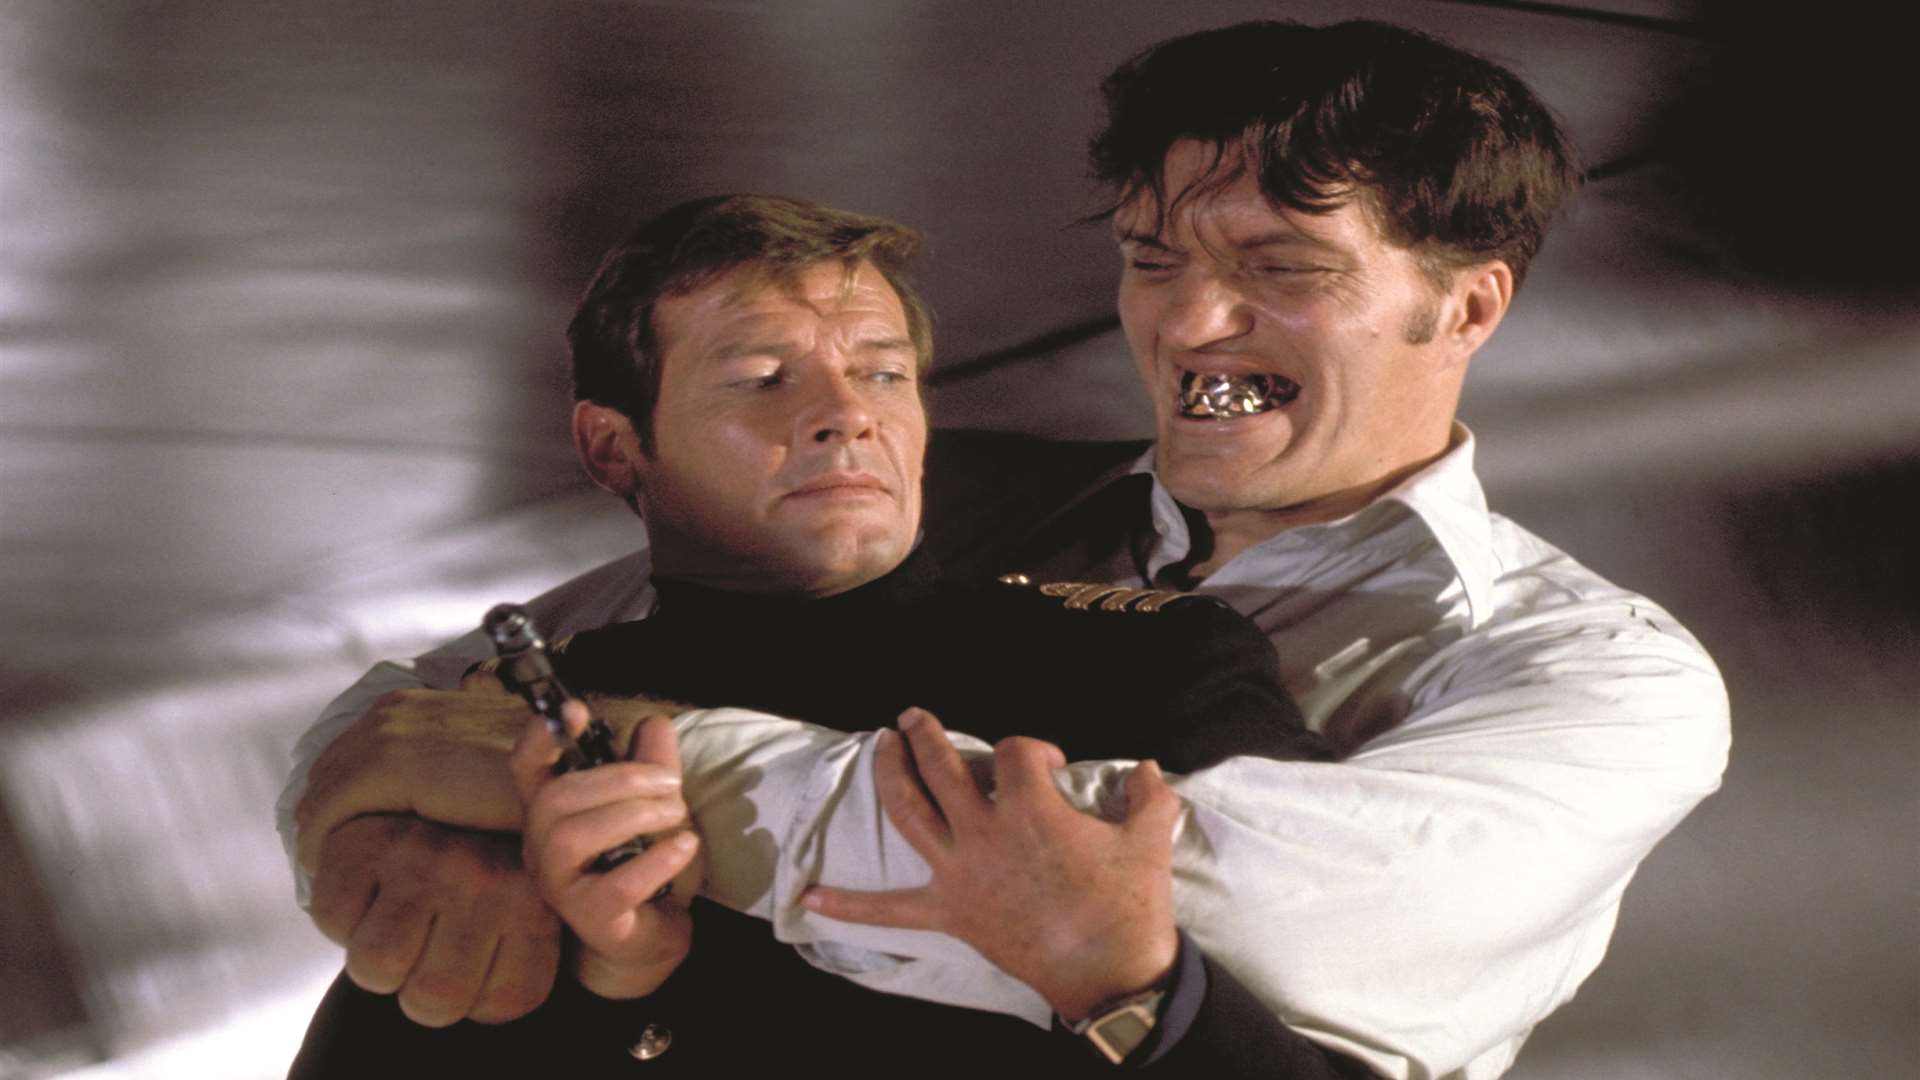 Richard Kiel as Jaws was voted the best Bond villain in a recent poll, seen with Roger Moore as Bond, taken from Bond on Bond by Roger Moore c. 1962-2012 Danjaq LLC and United Artists Corporation, All Rights Reserved